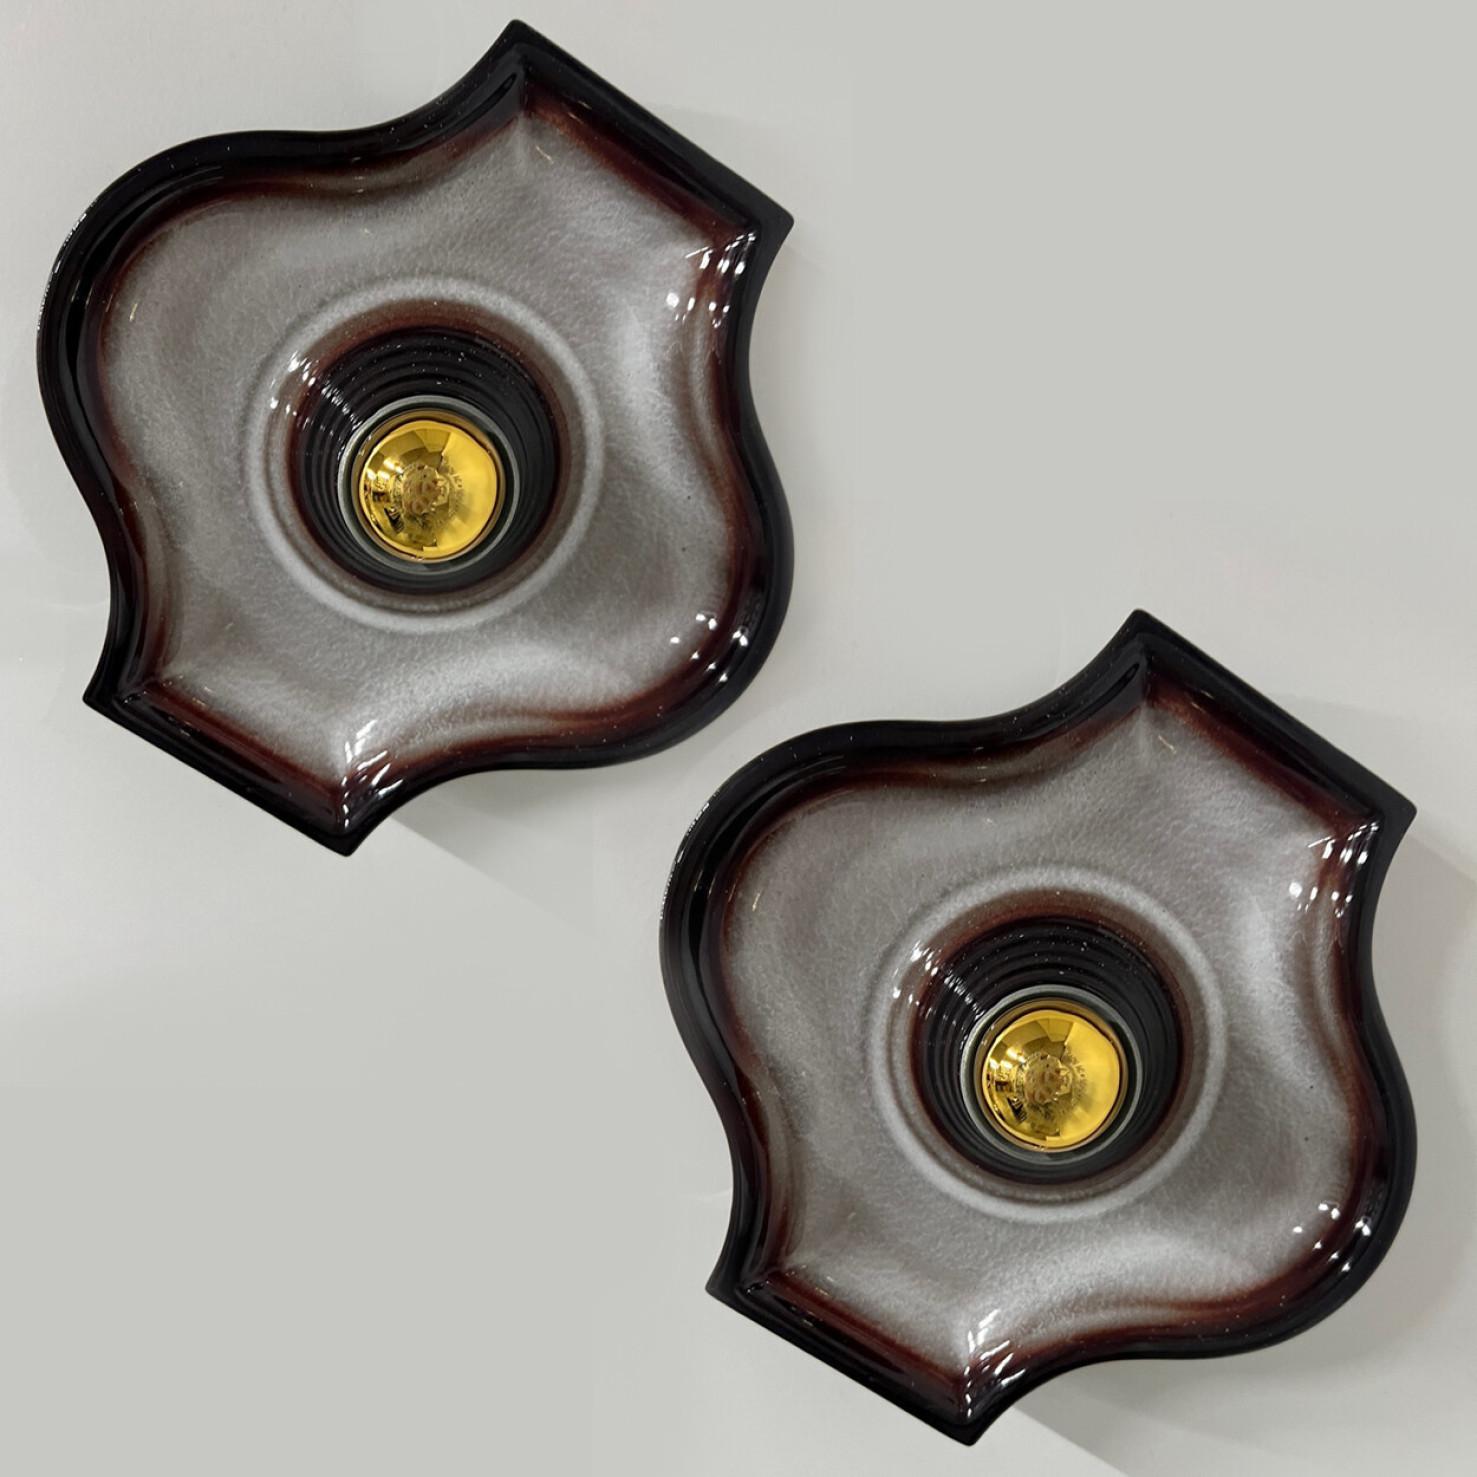 Oval grey and brown ceramic wall lights in Fat Lava style. Manufactured by Hustadt Leuchten Keramik, Germany in the 1970s.

The style of the glaze is called 'Fat Lava'. Which means the glaze is thick on some parts, like lava.
A typical way to finish